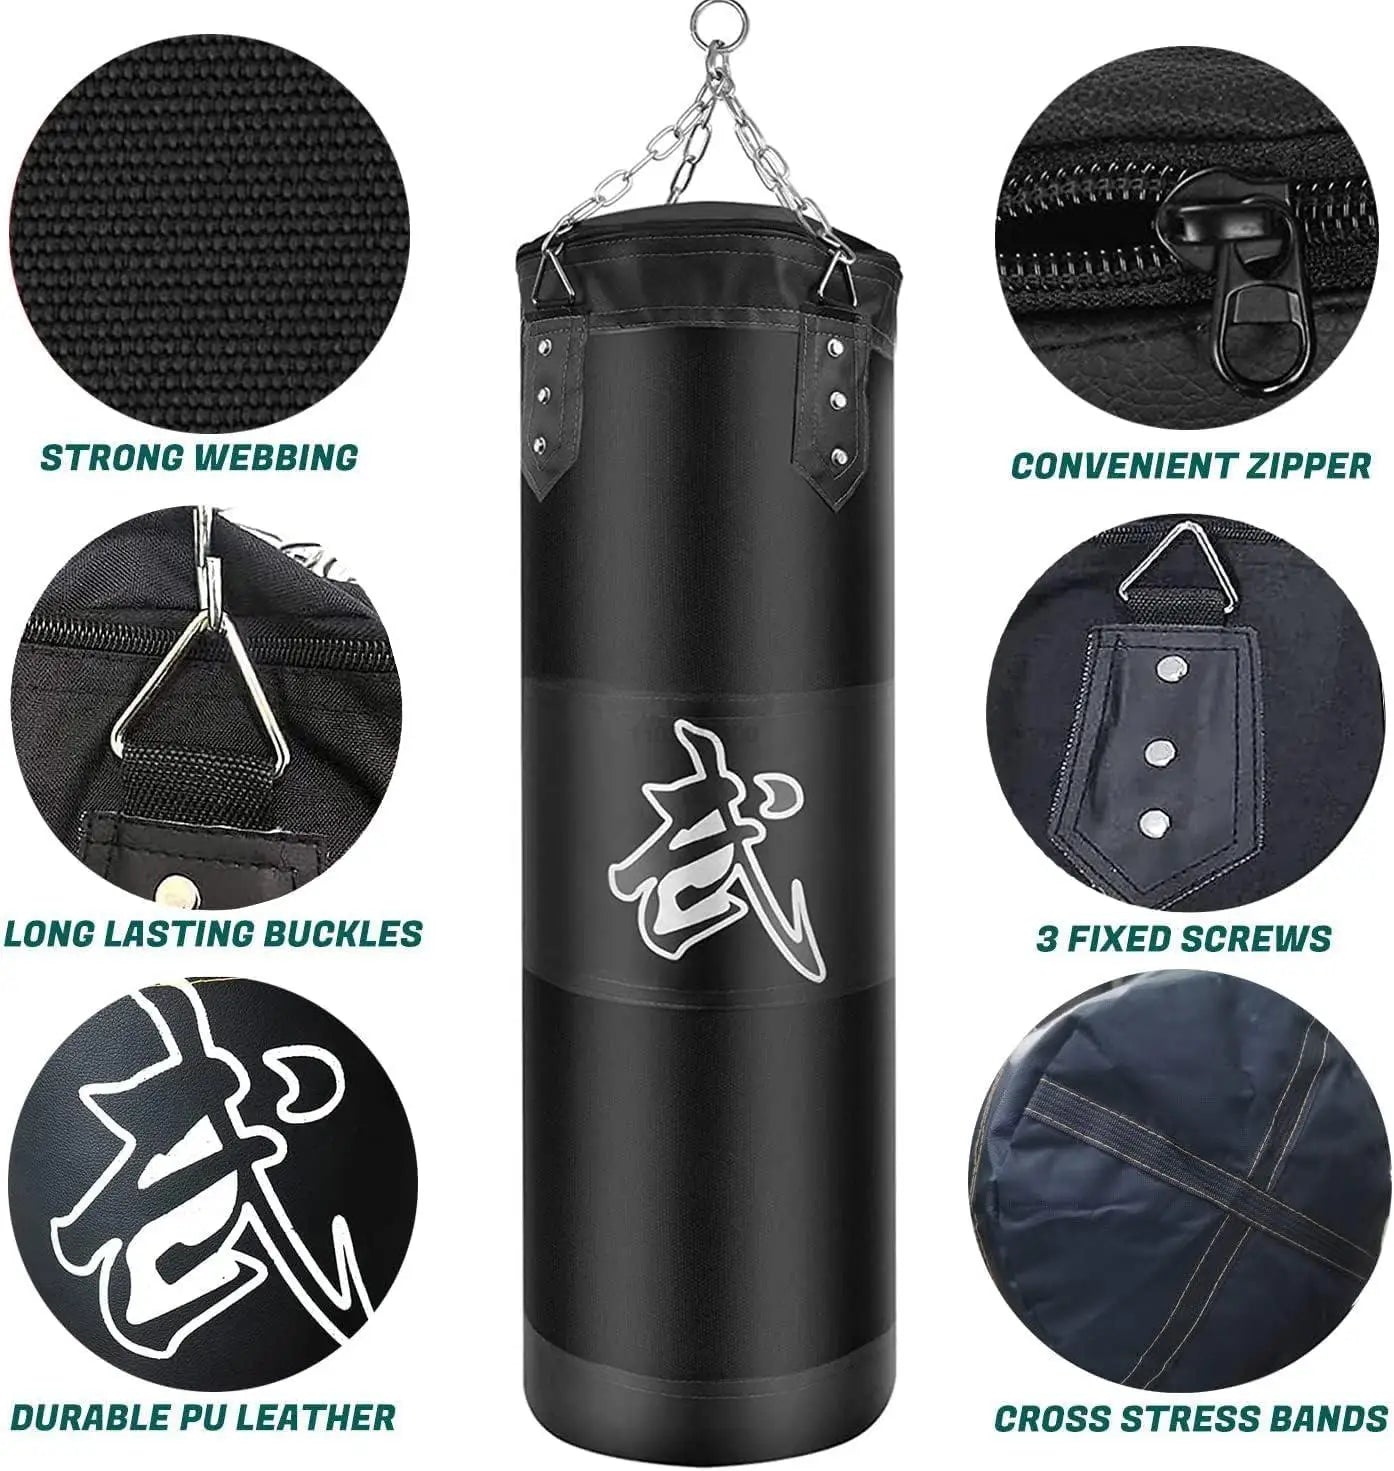 Punch Sandbag Durable Boxing Heavy Punch Bag With Metal Chain Hook